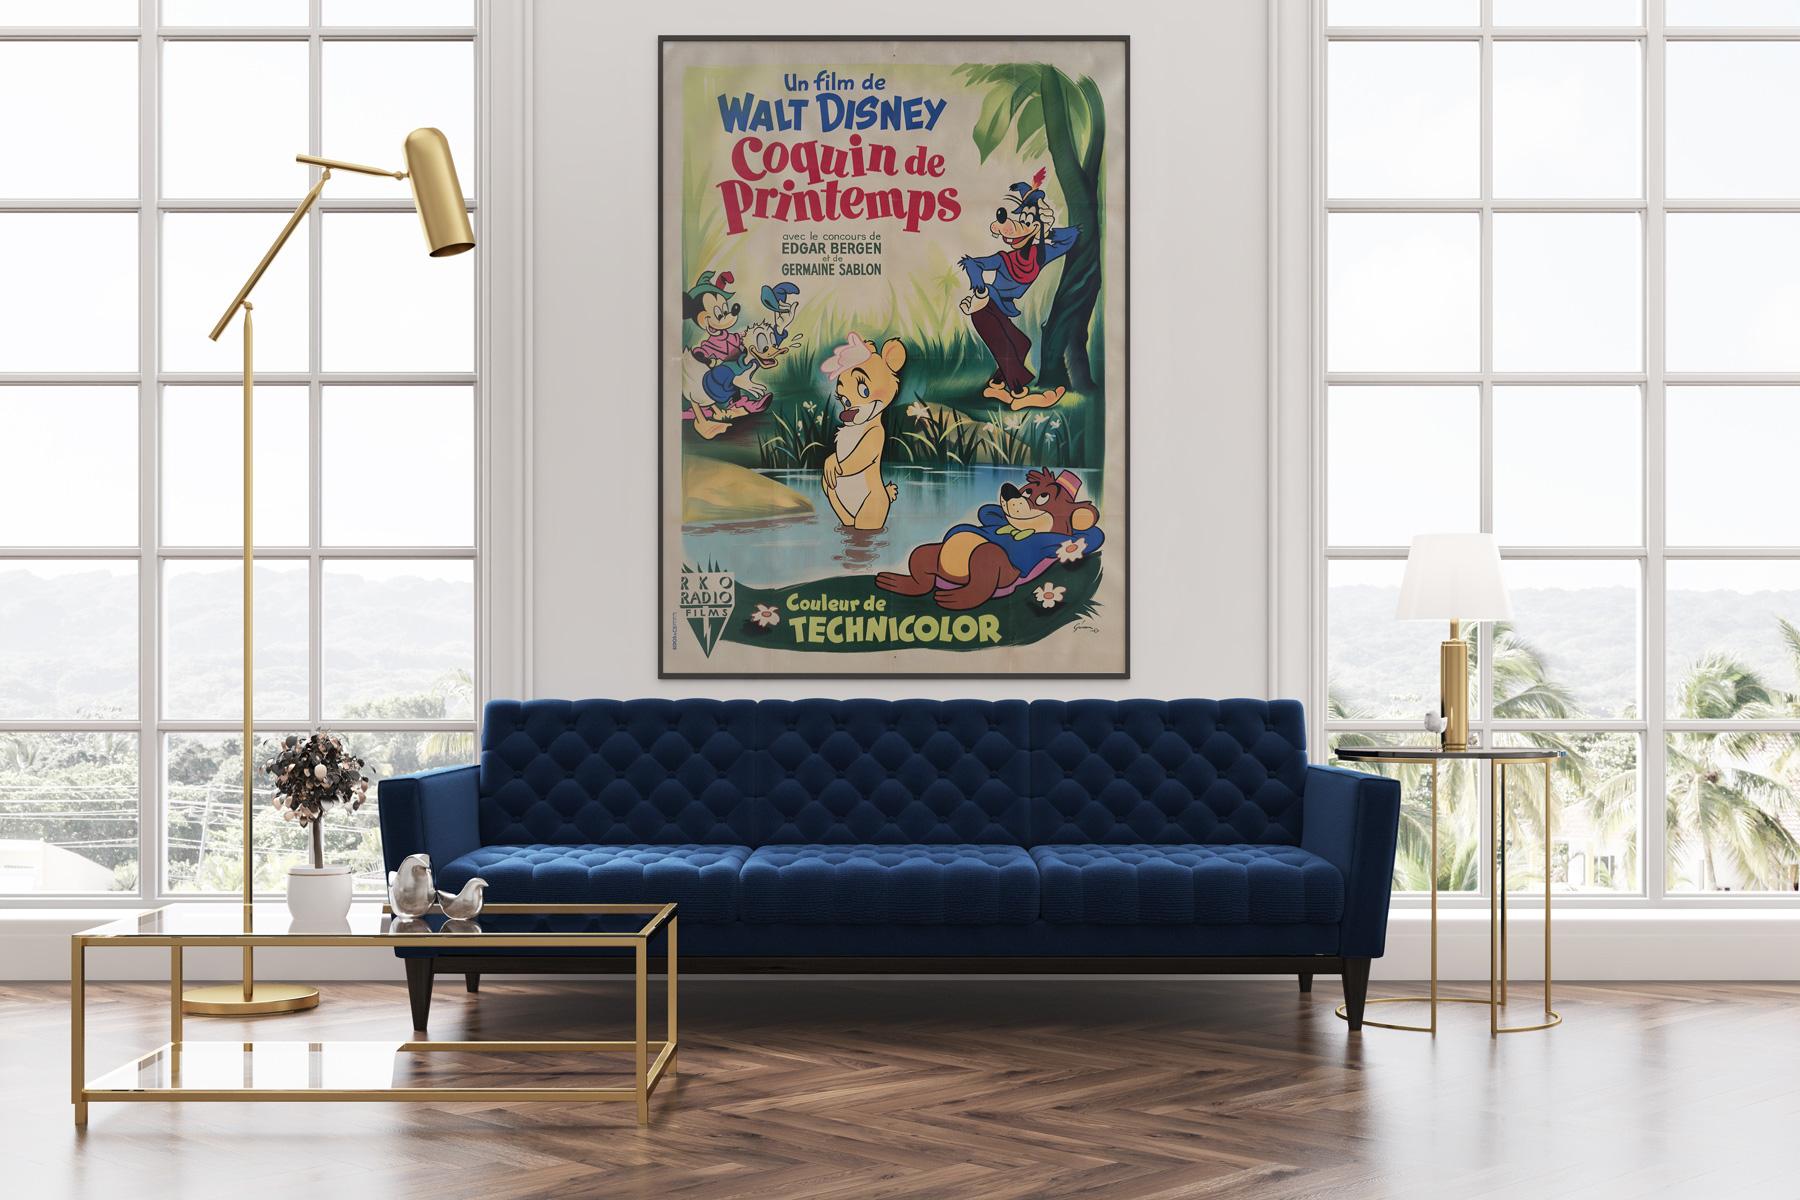 Superb and very rare first-year-of-release French Grande film poster for Disney's Fun and Fancy Free.

Fun and Fancy Free was Walt Disney's ninth animated feature film, and contains two separate stories featuring Mickey Mouse, Donald, Goofy and